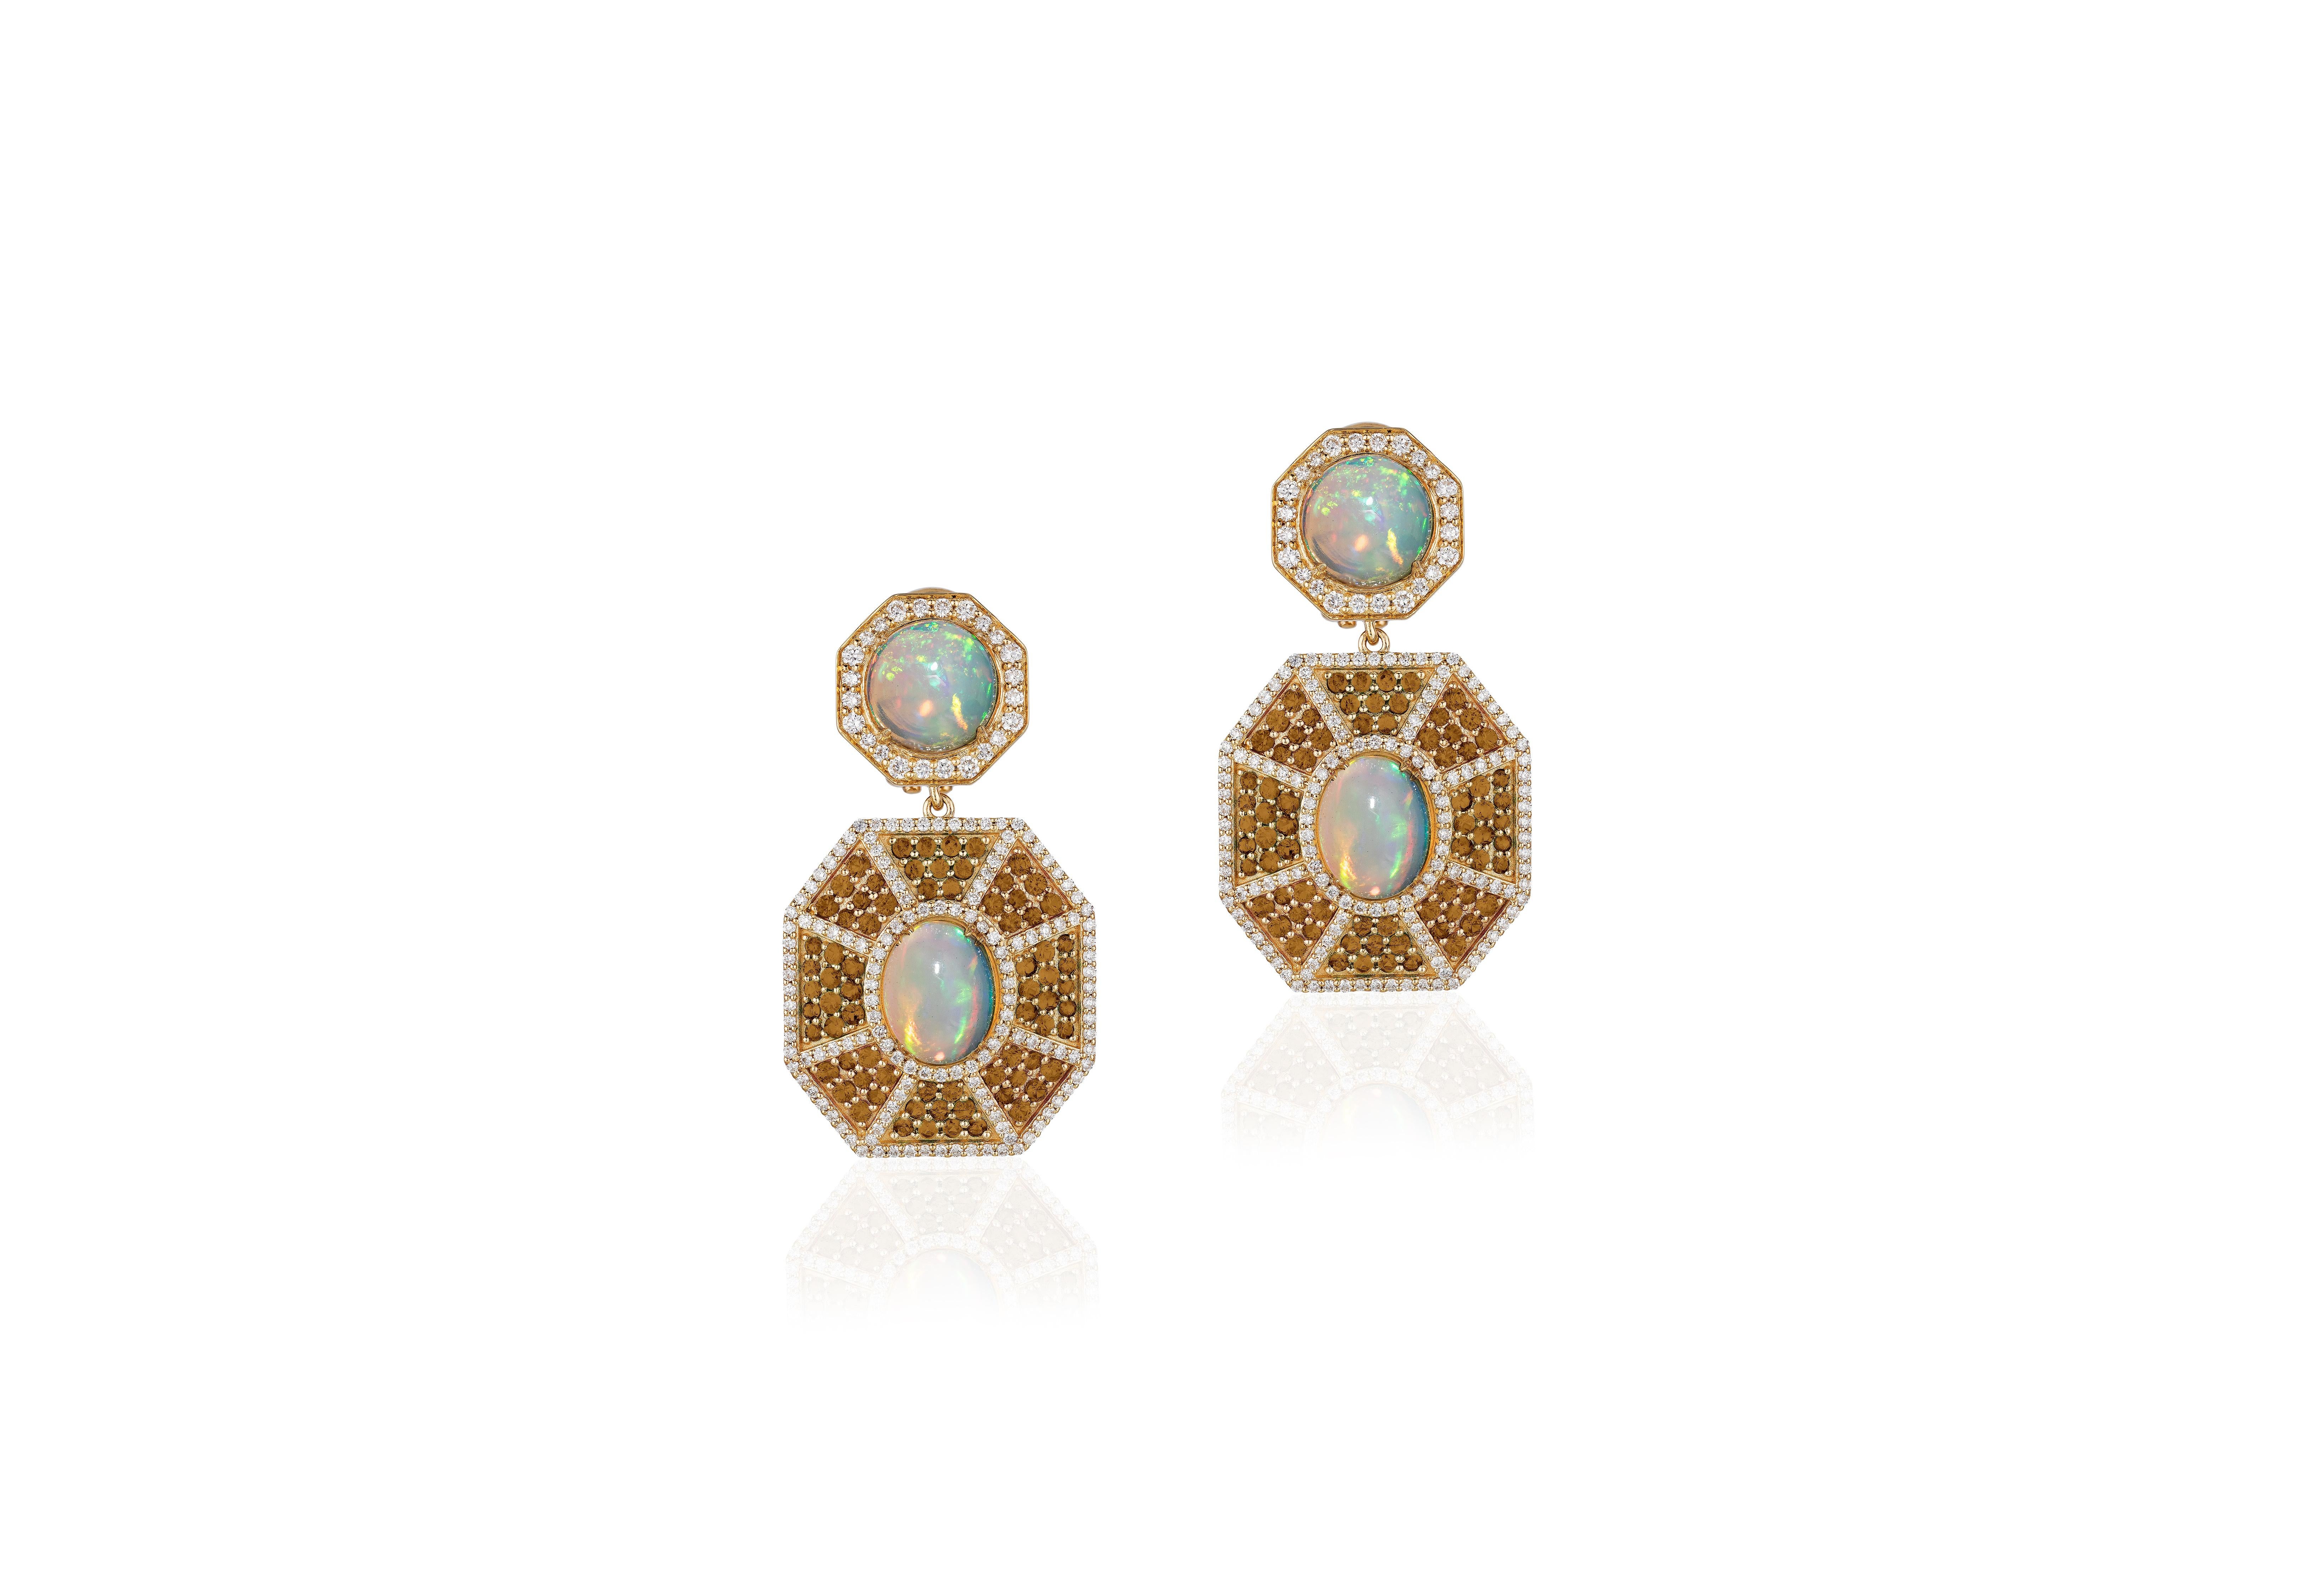 Opal Double Octagon Earrings with Brown Diamonds in 18k Yellow, from 'G-One' Collection

Stone Size: 8 & 9 x 7 mm

Gemstone Weight: 4.93 Carats

Diamond: G-H / VS, Approx Wt: 2.59 Carats